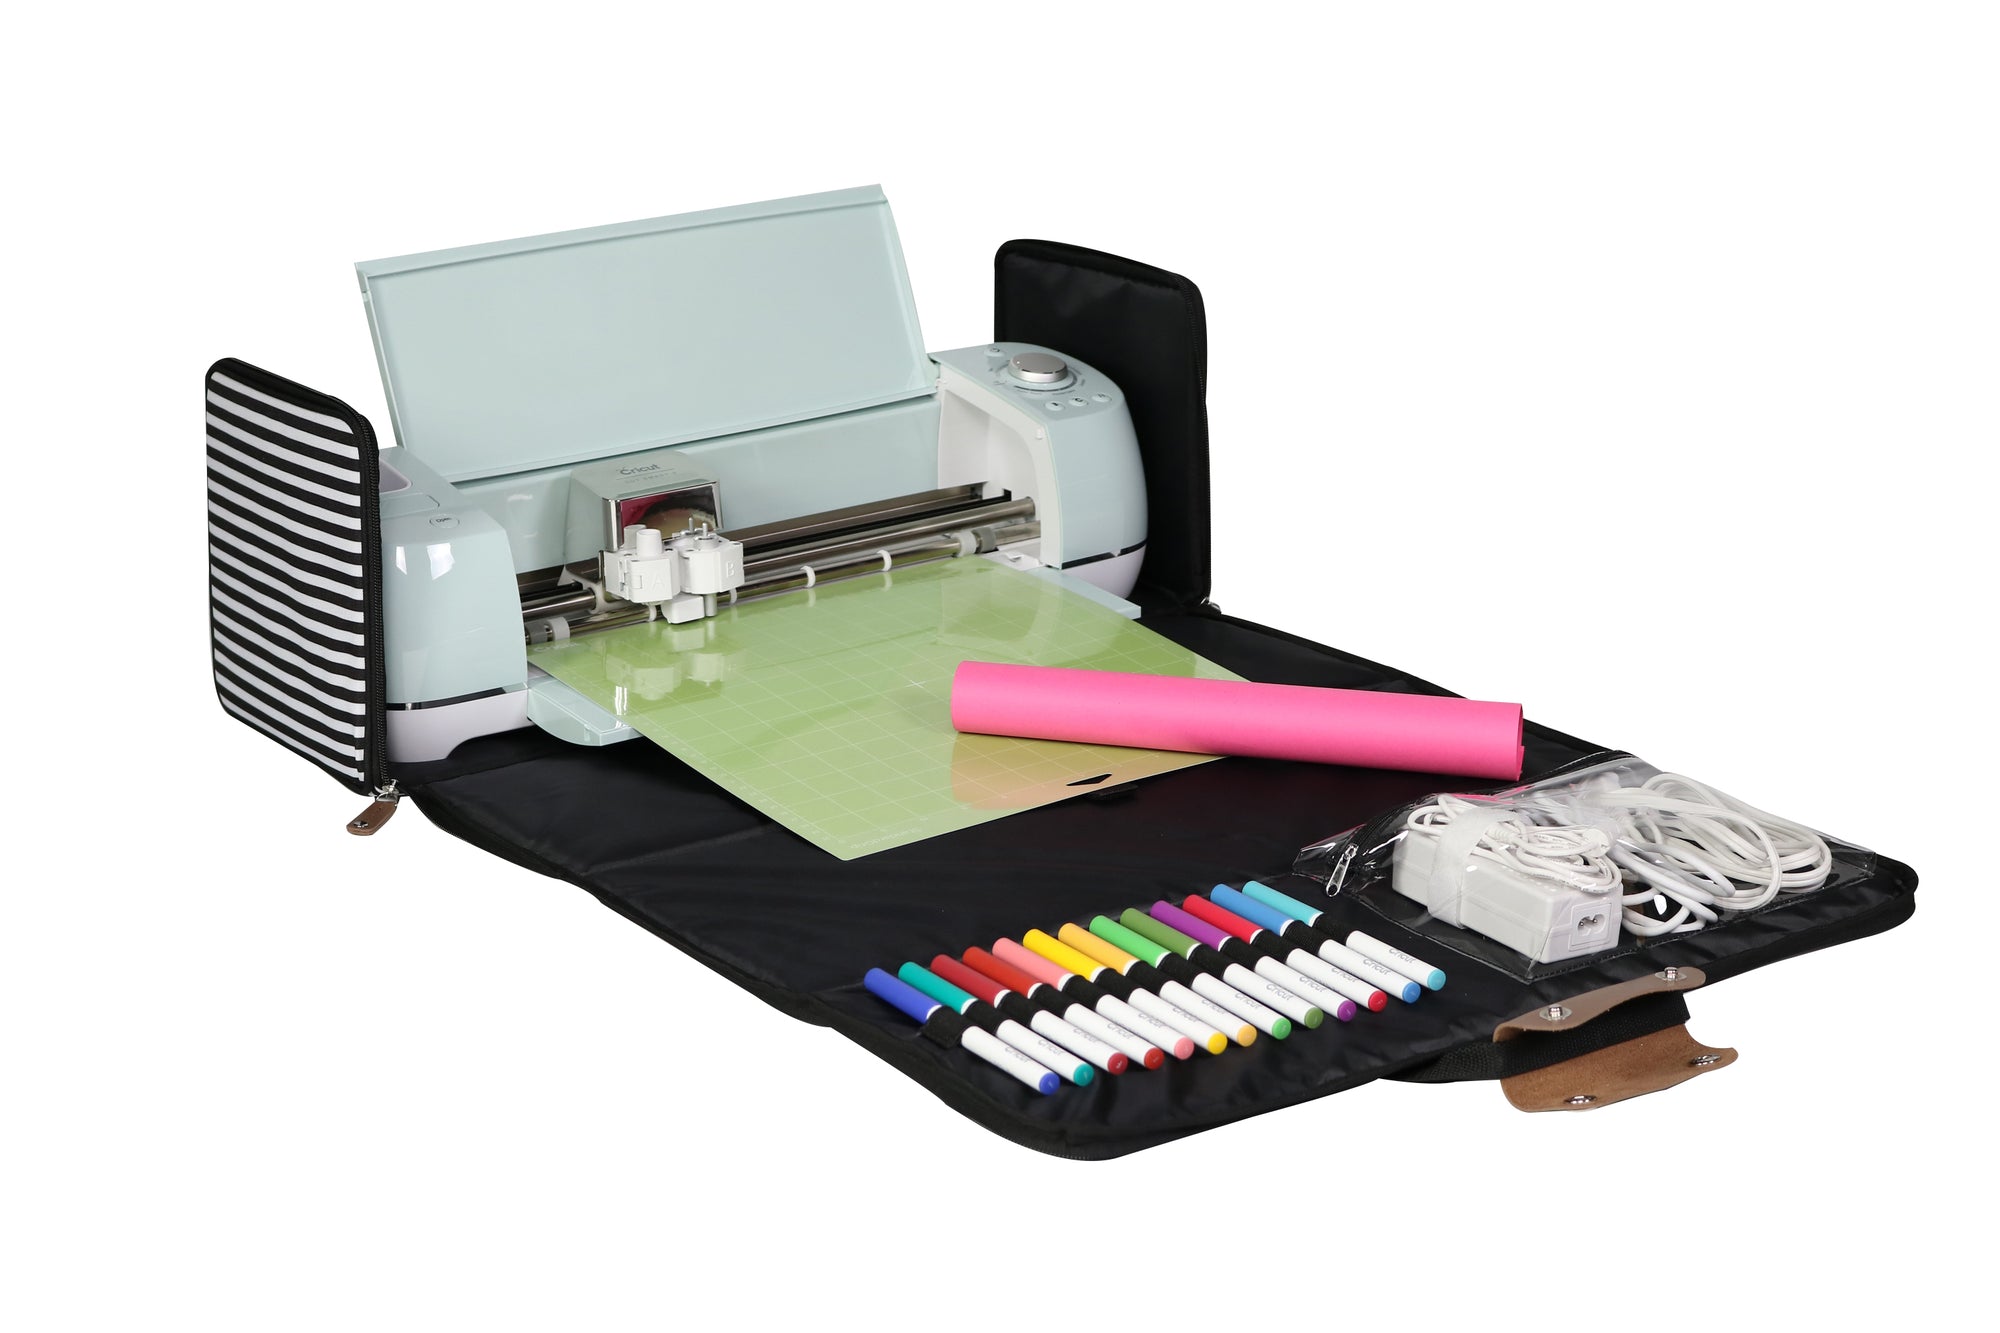 Carrying Case, For Cricut Explore Air 1 2 3, Double-layer Bag Compatible  With Cricut Maker 1 2 3